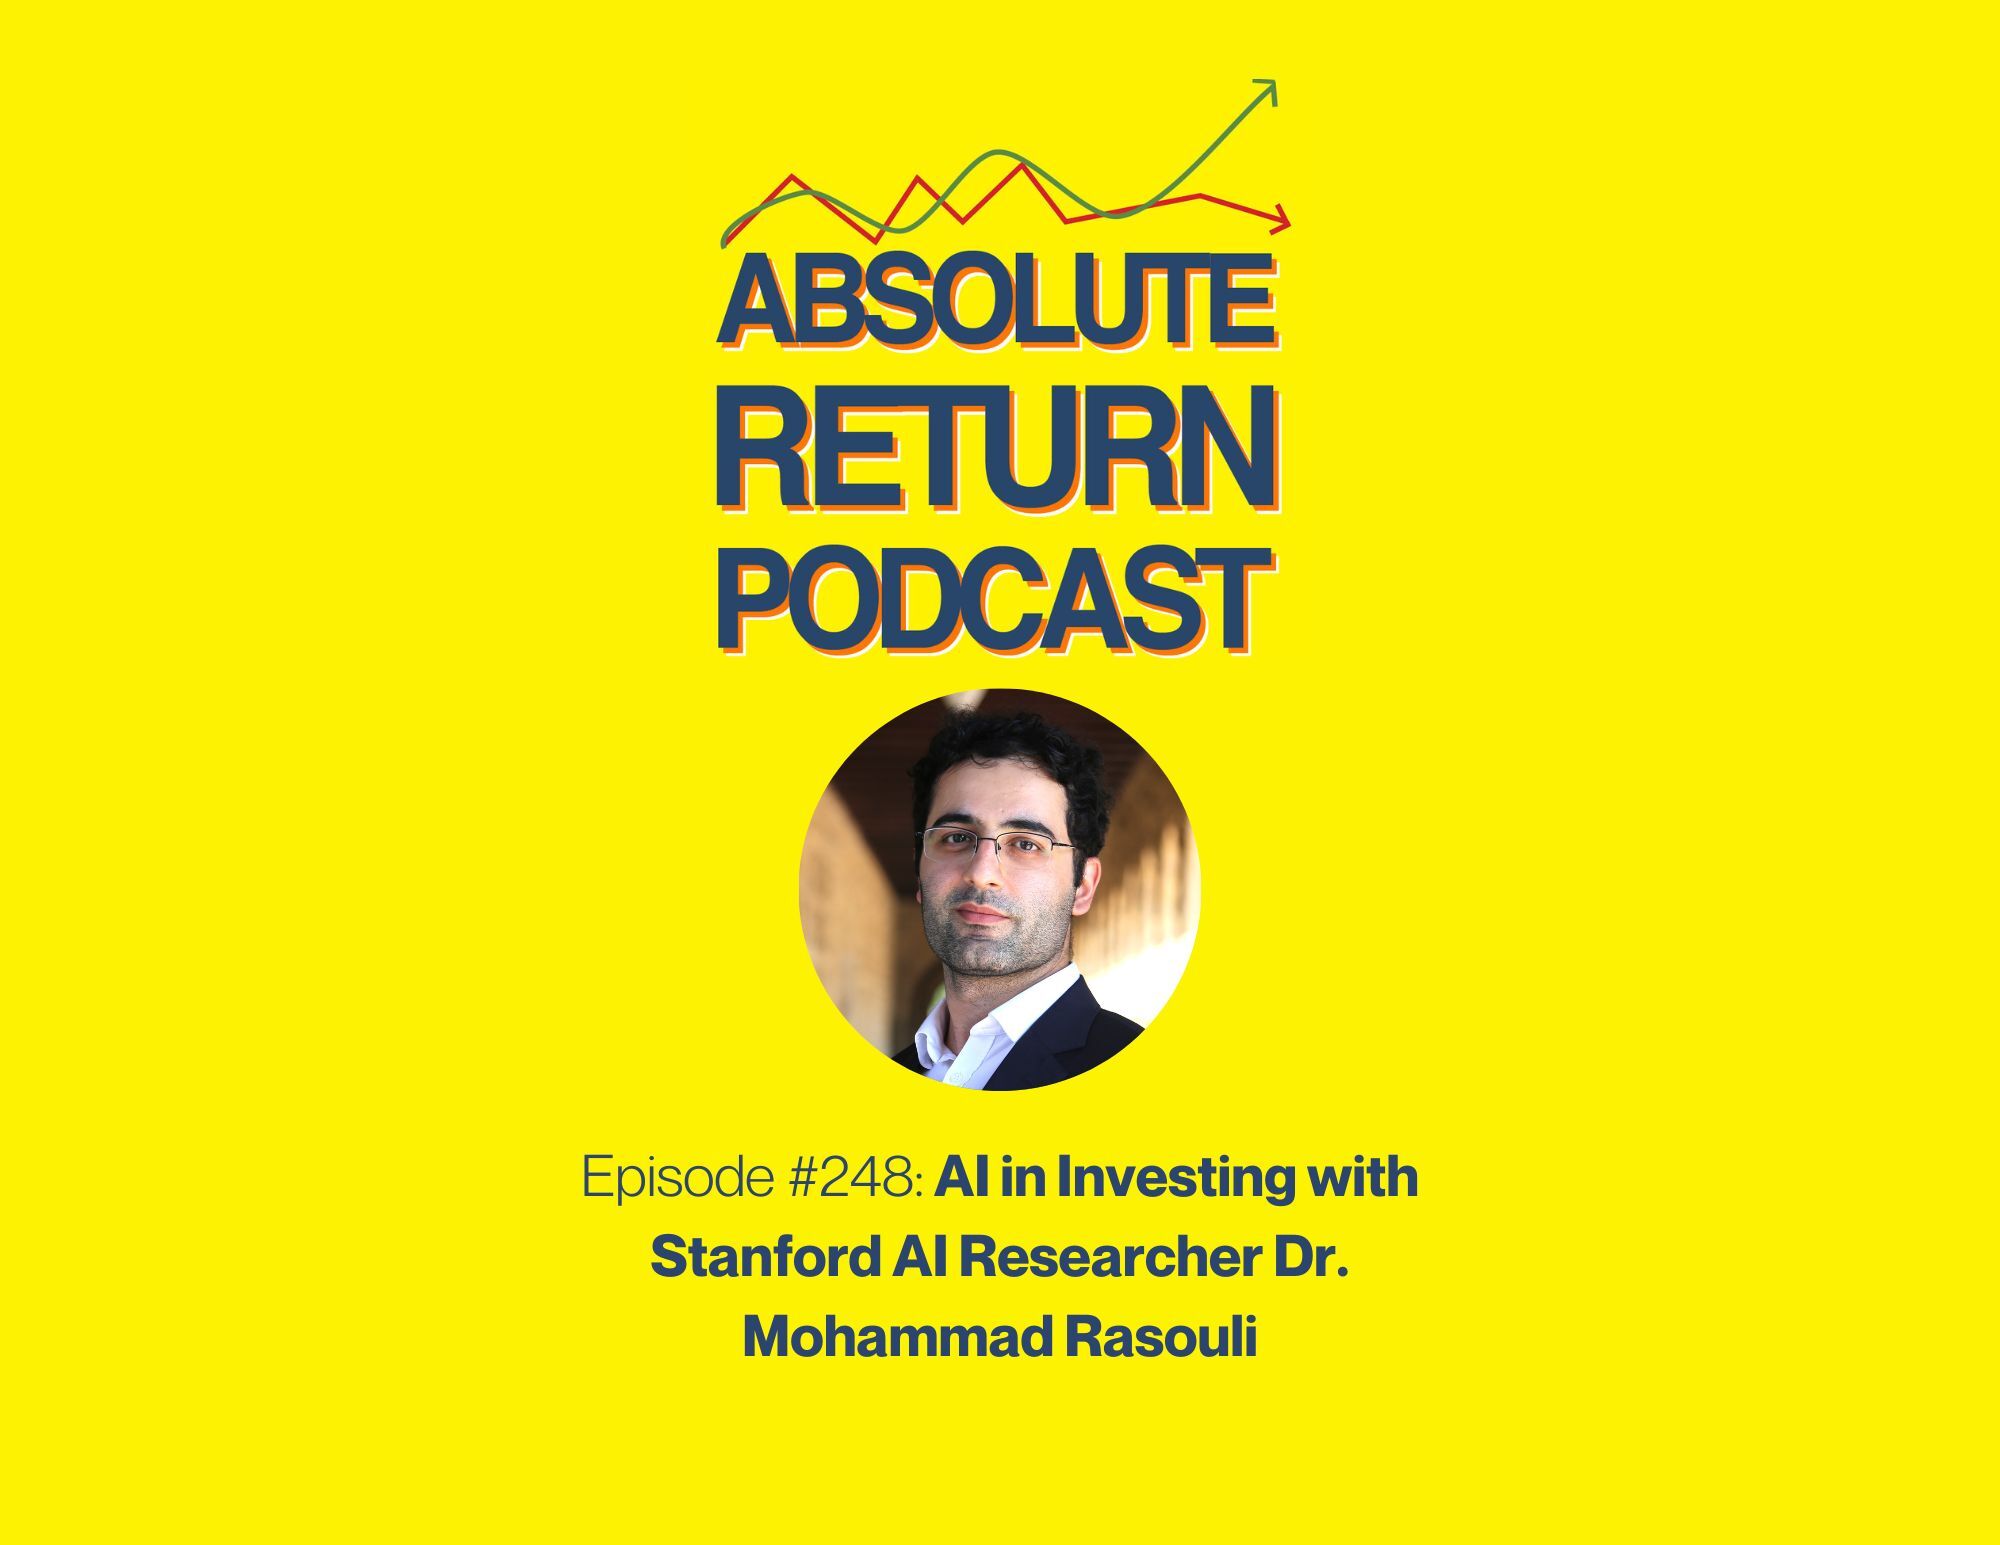 Absolute Return Podcast #248: AI in Investing with Stanford AI Researcher Dr. Mohammad Rasouli